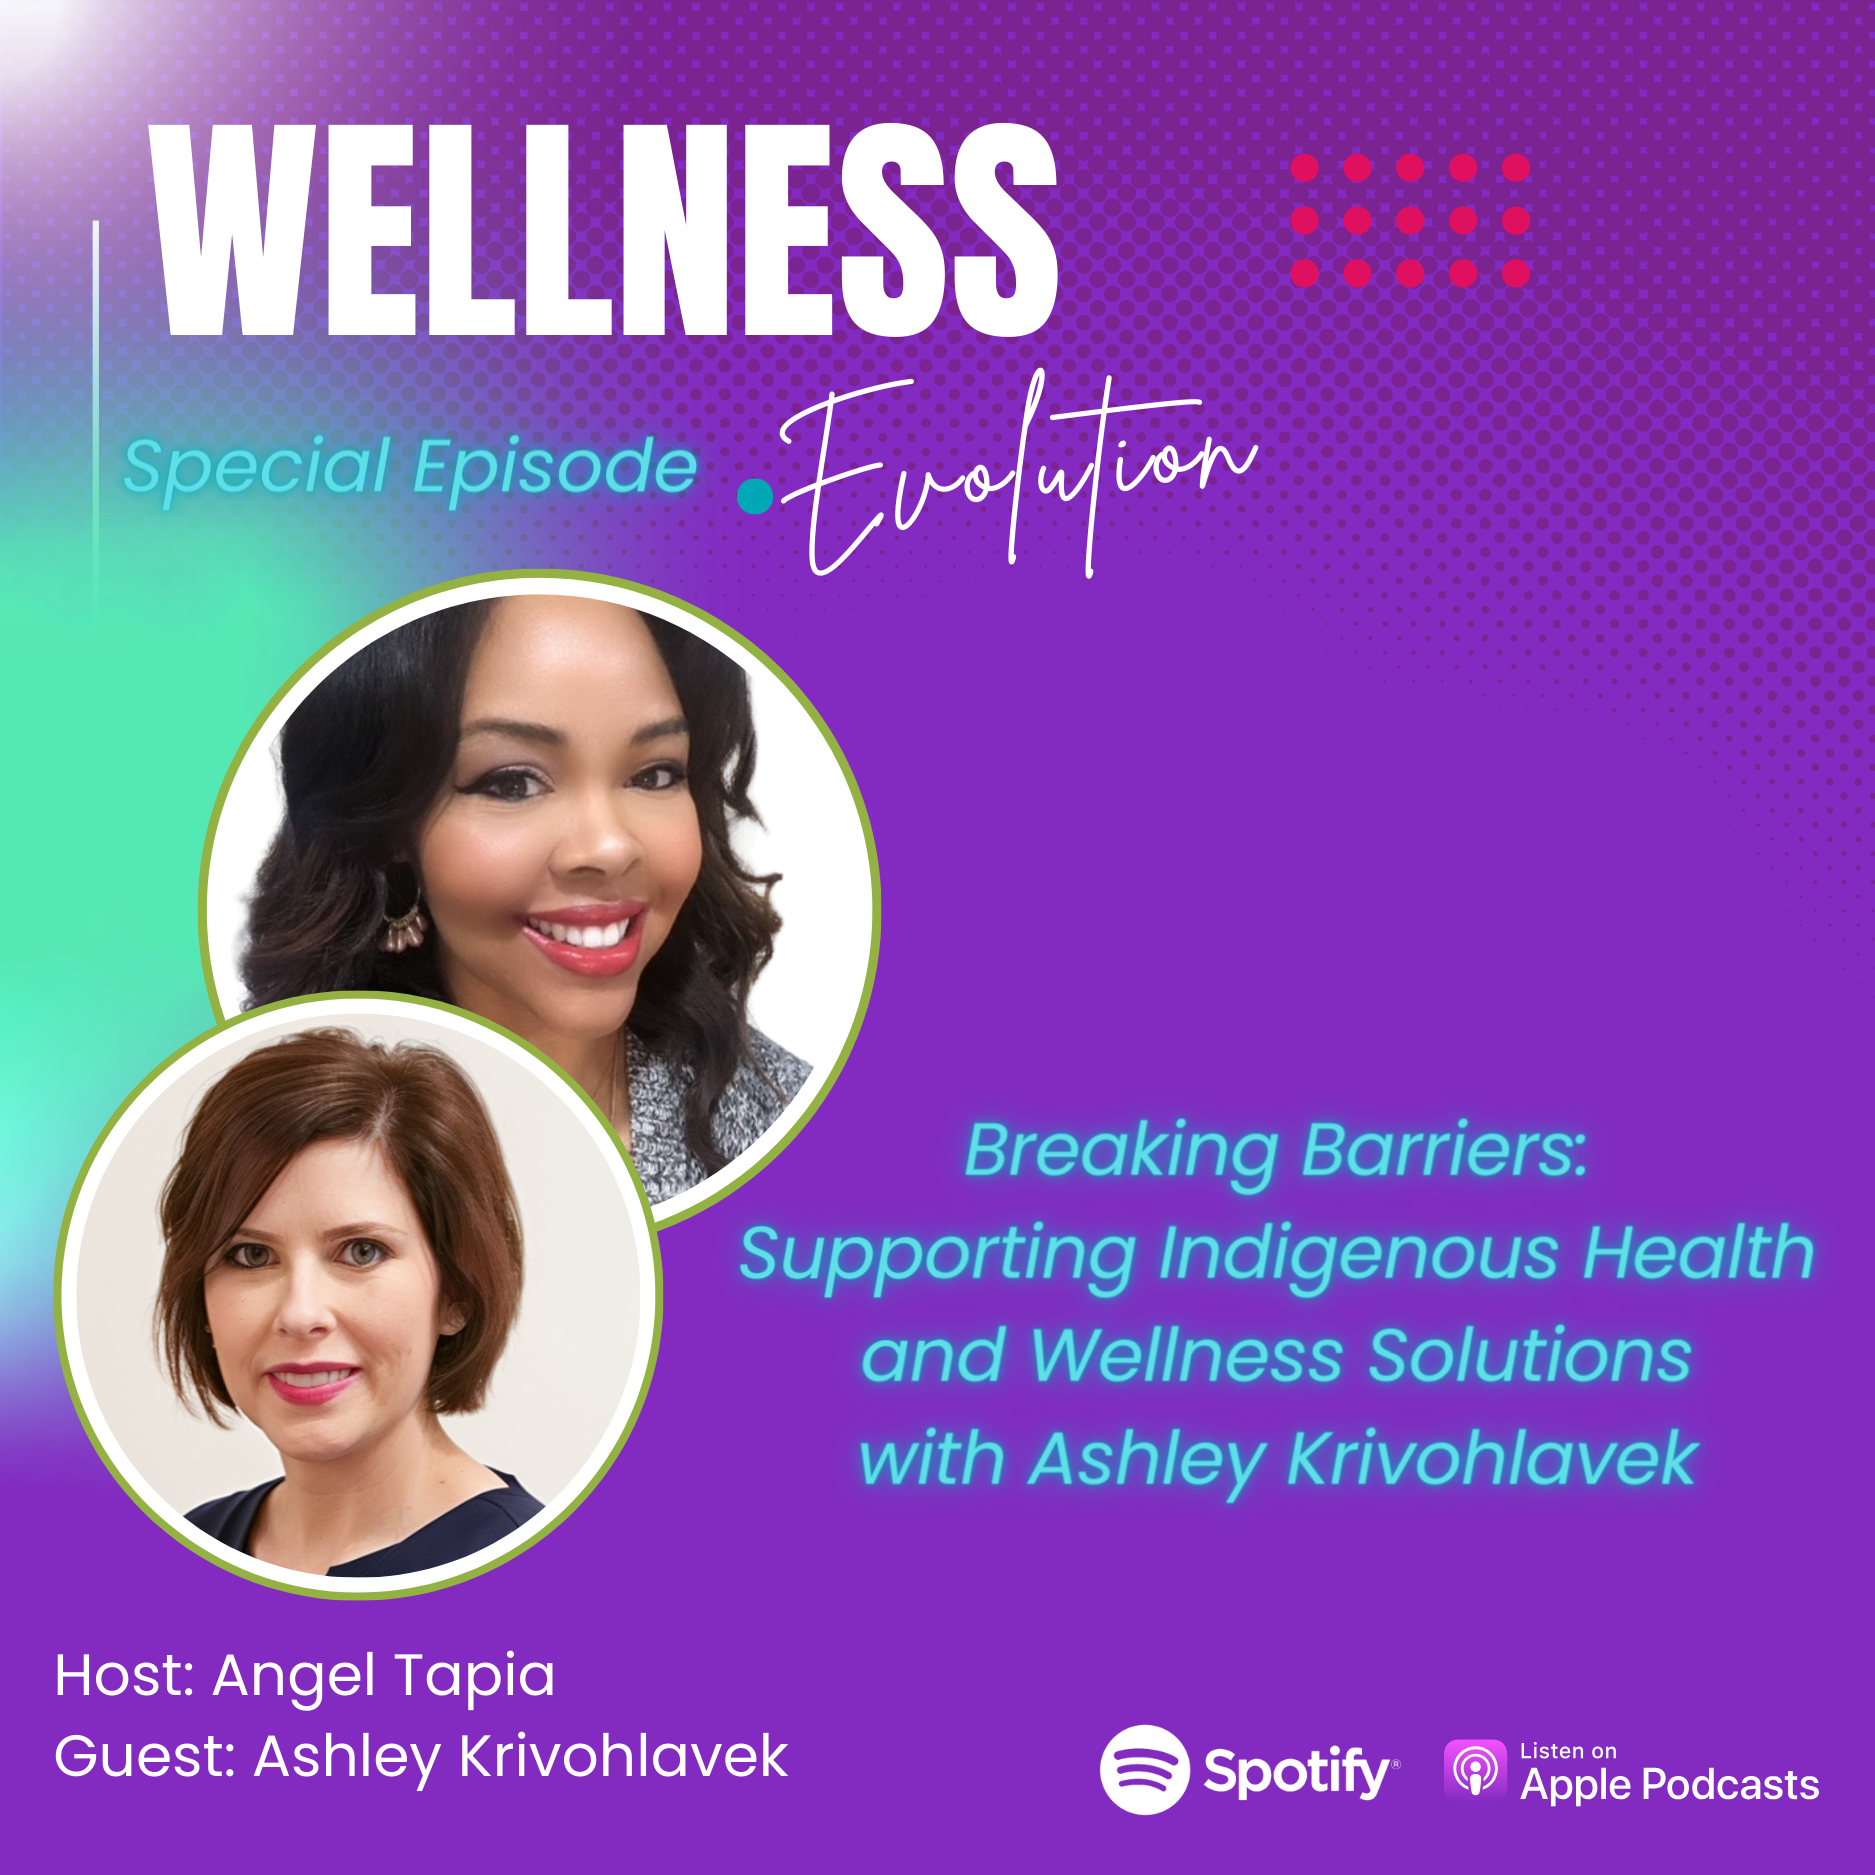 Breaking Barriers: Supporting Indigenous Health and Wellness Solutions with Ashley Krivohlavek